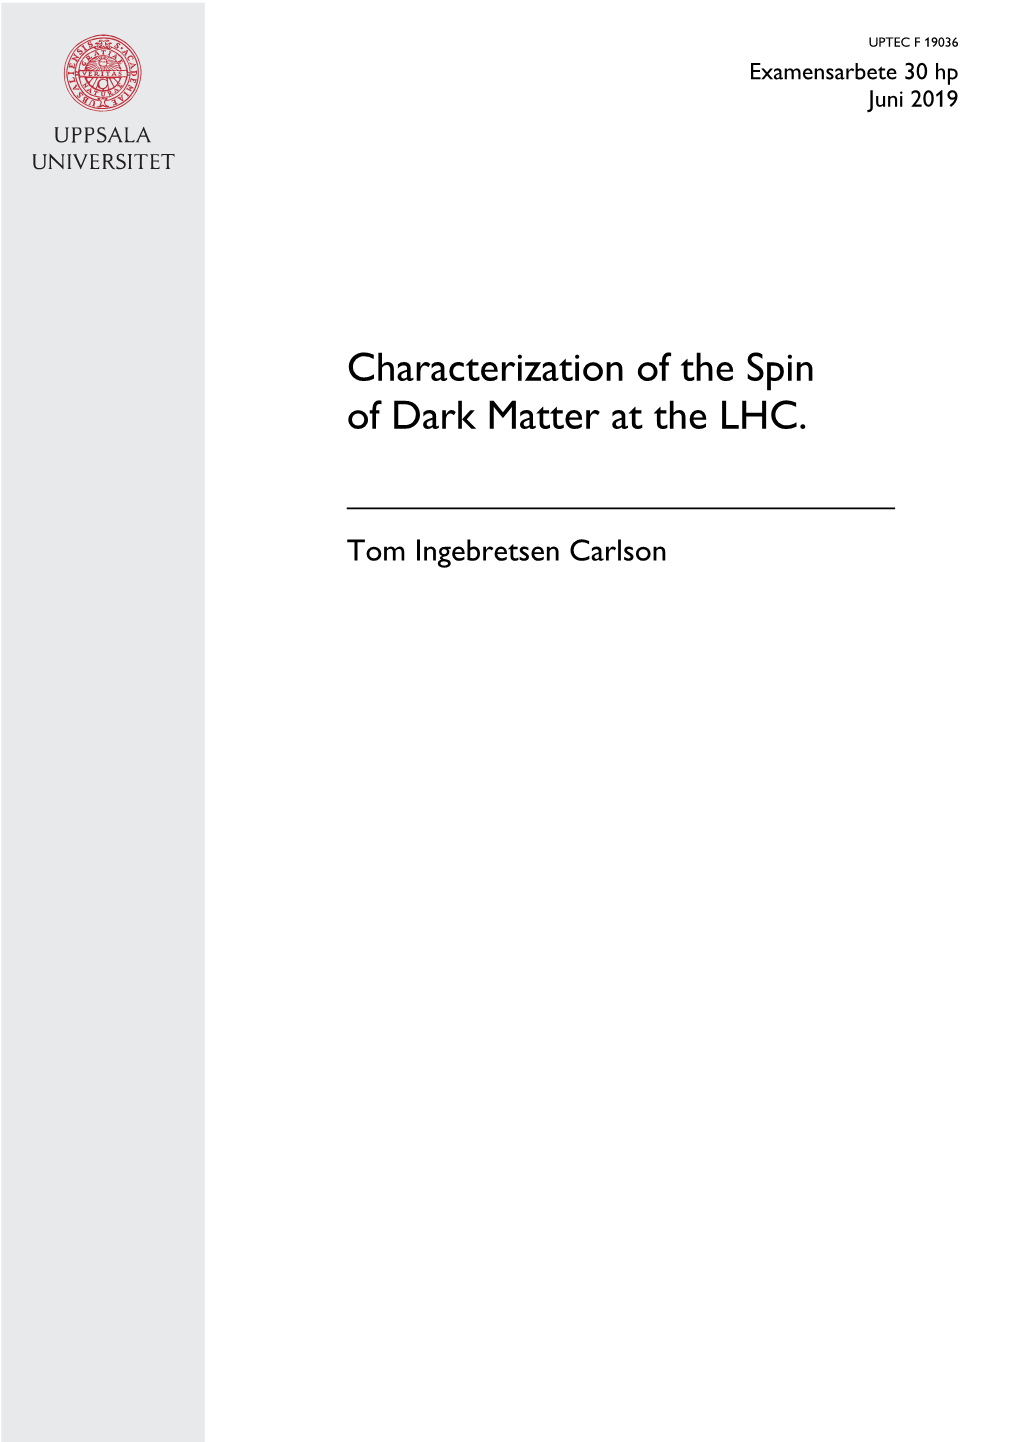 Characterization of the Spin of Dark Matter at the LHC